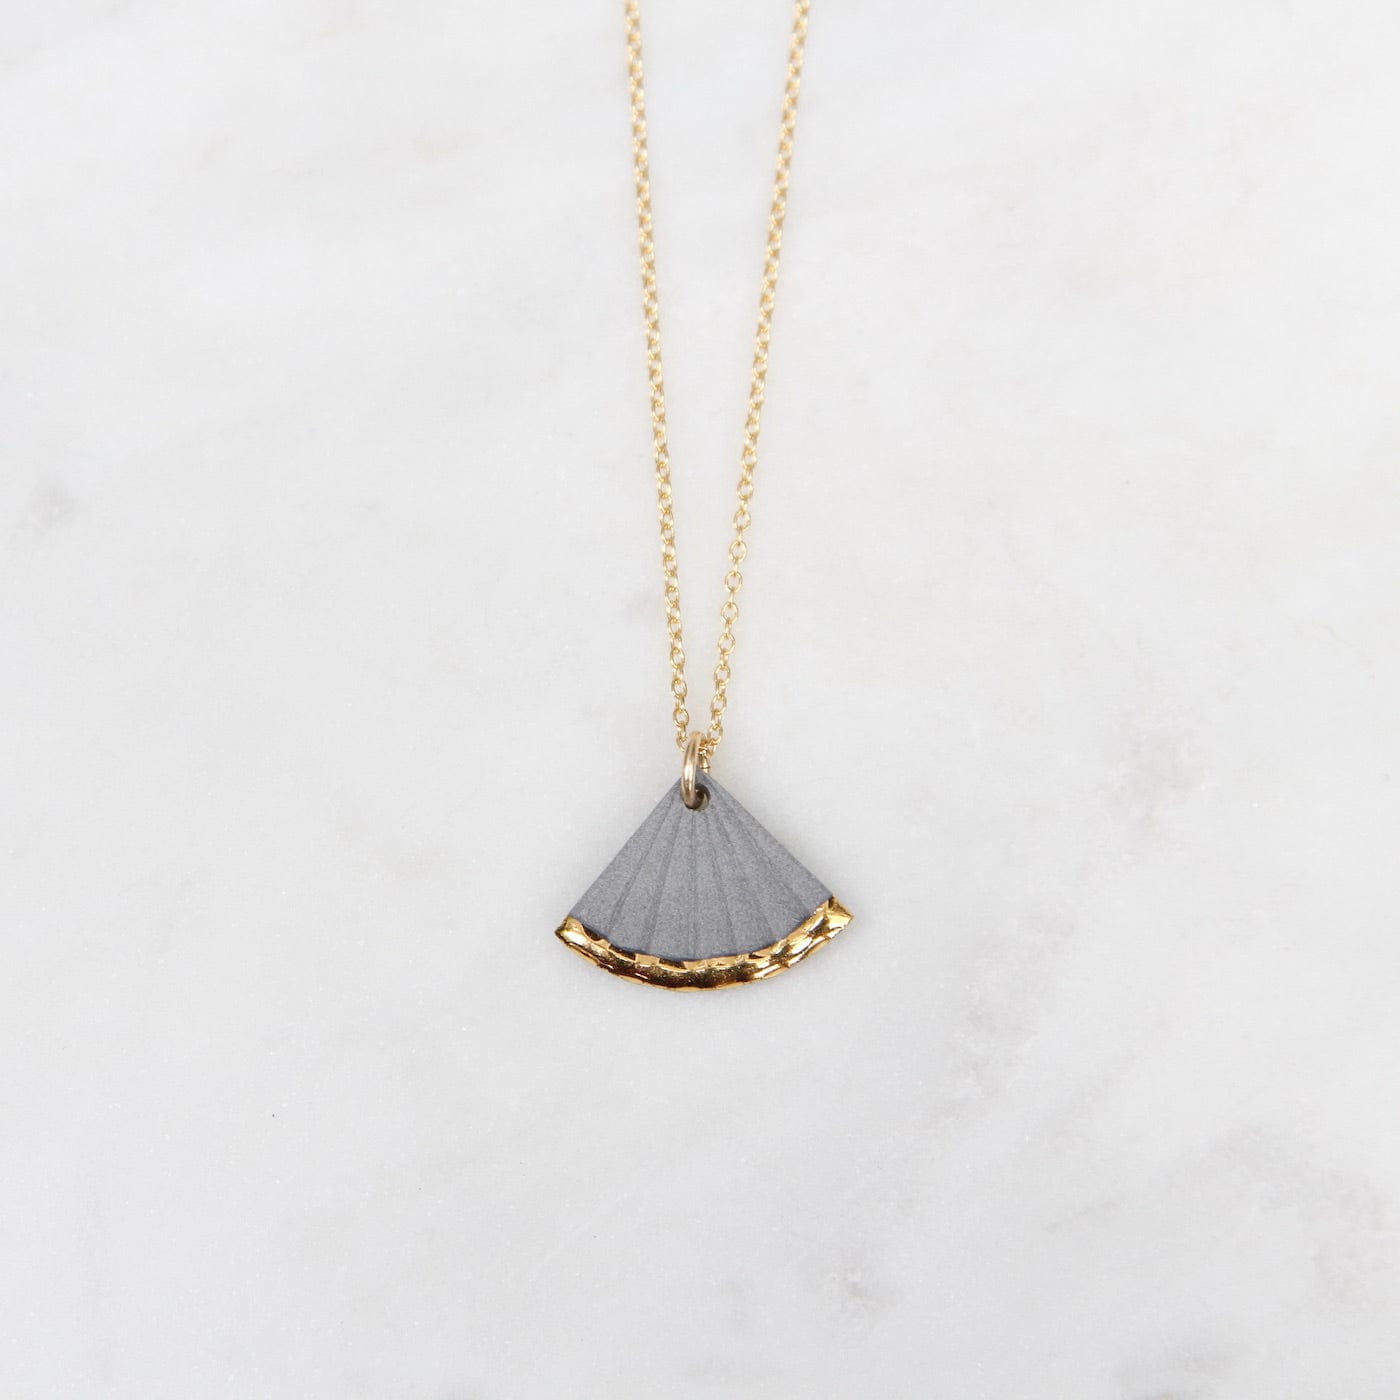 NKL-GF Gold Dipped Small Fan Necklace - Grey